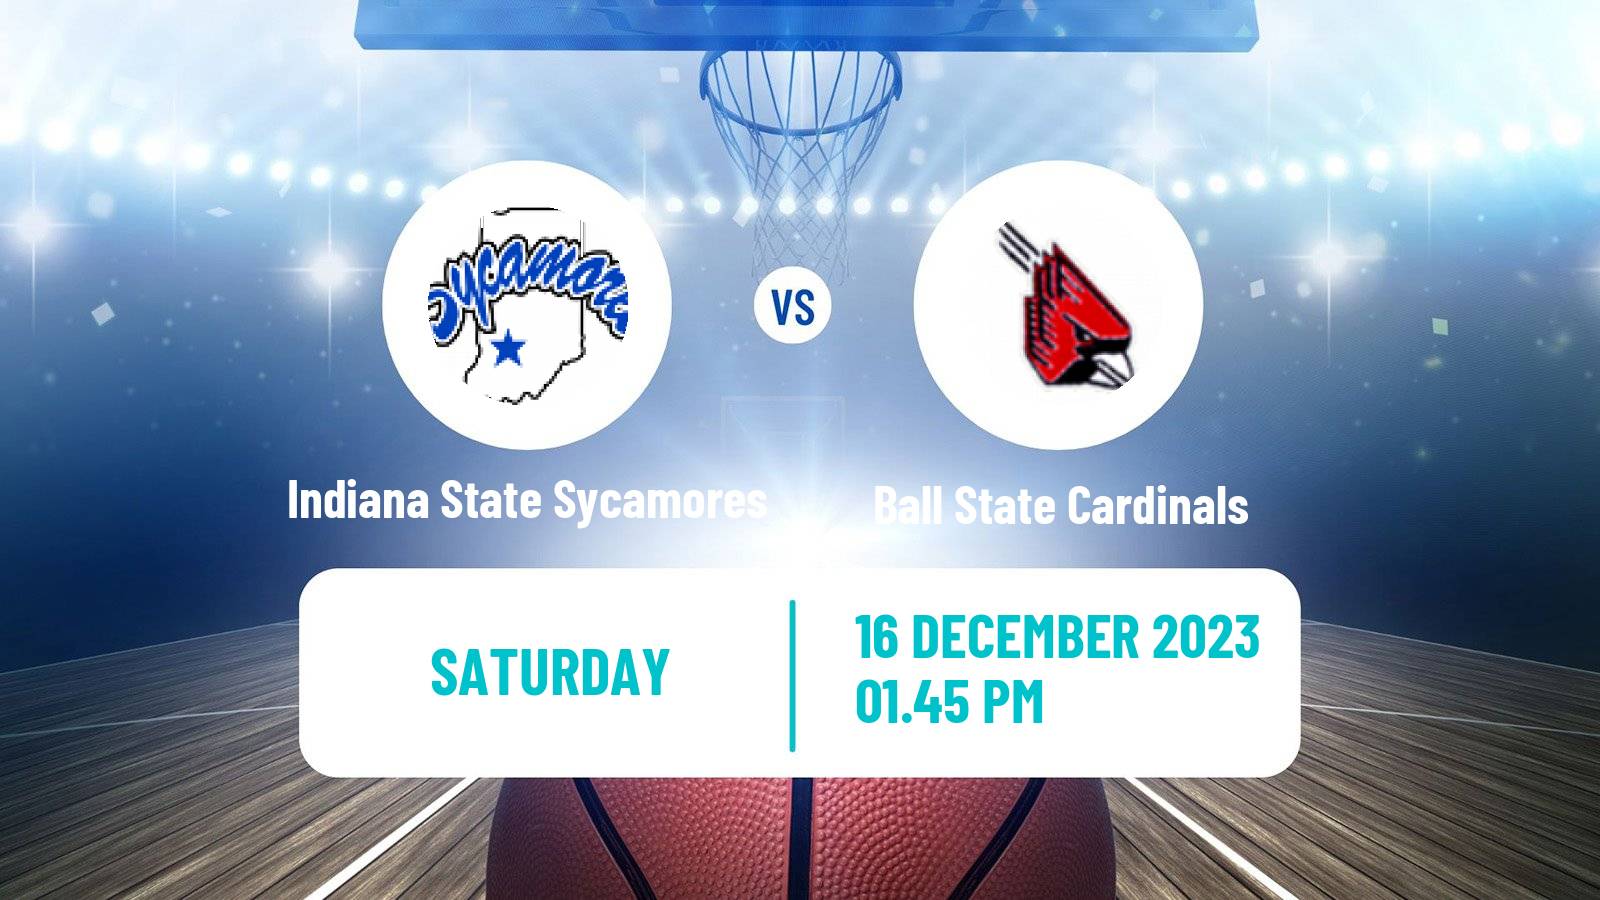 Basketball NCAA College Basketball Indiana State Sycamores - Ball State Cardinals